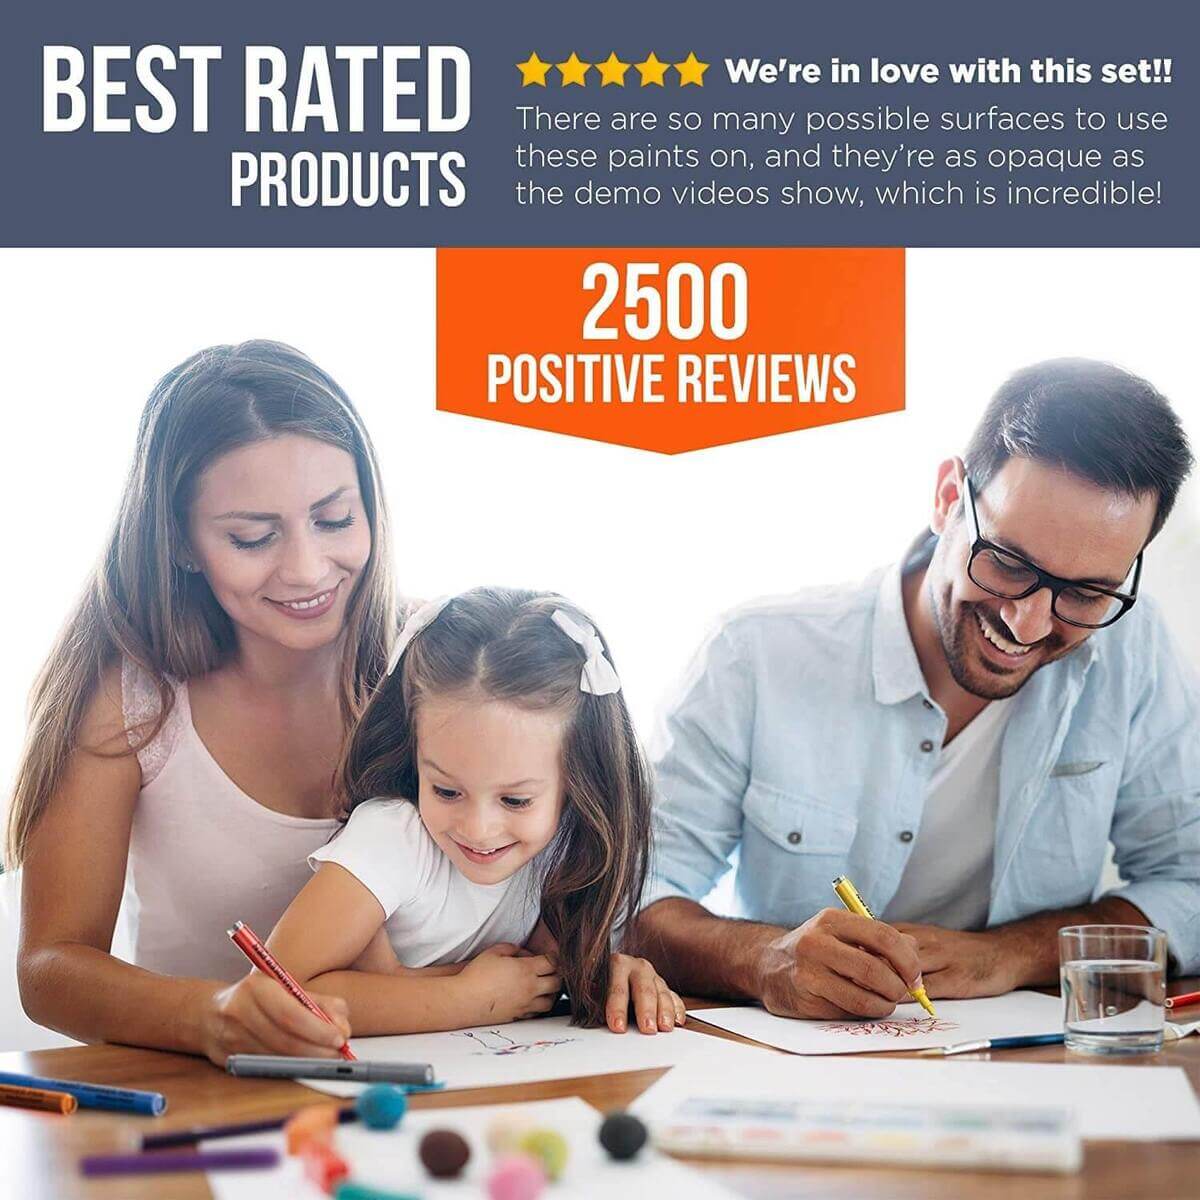 best rated products, 2500 positive reviews